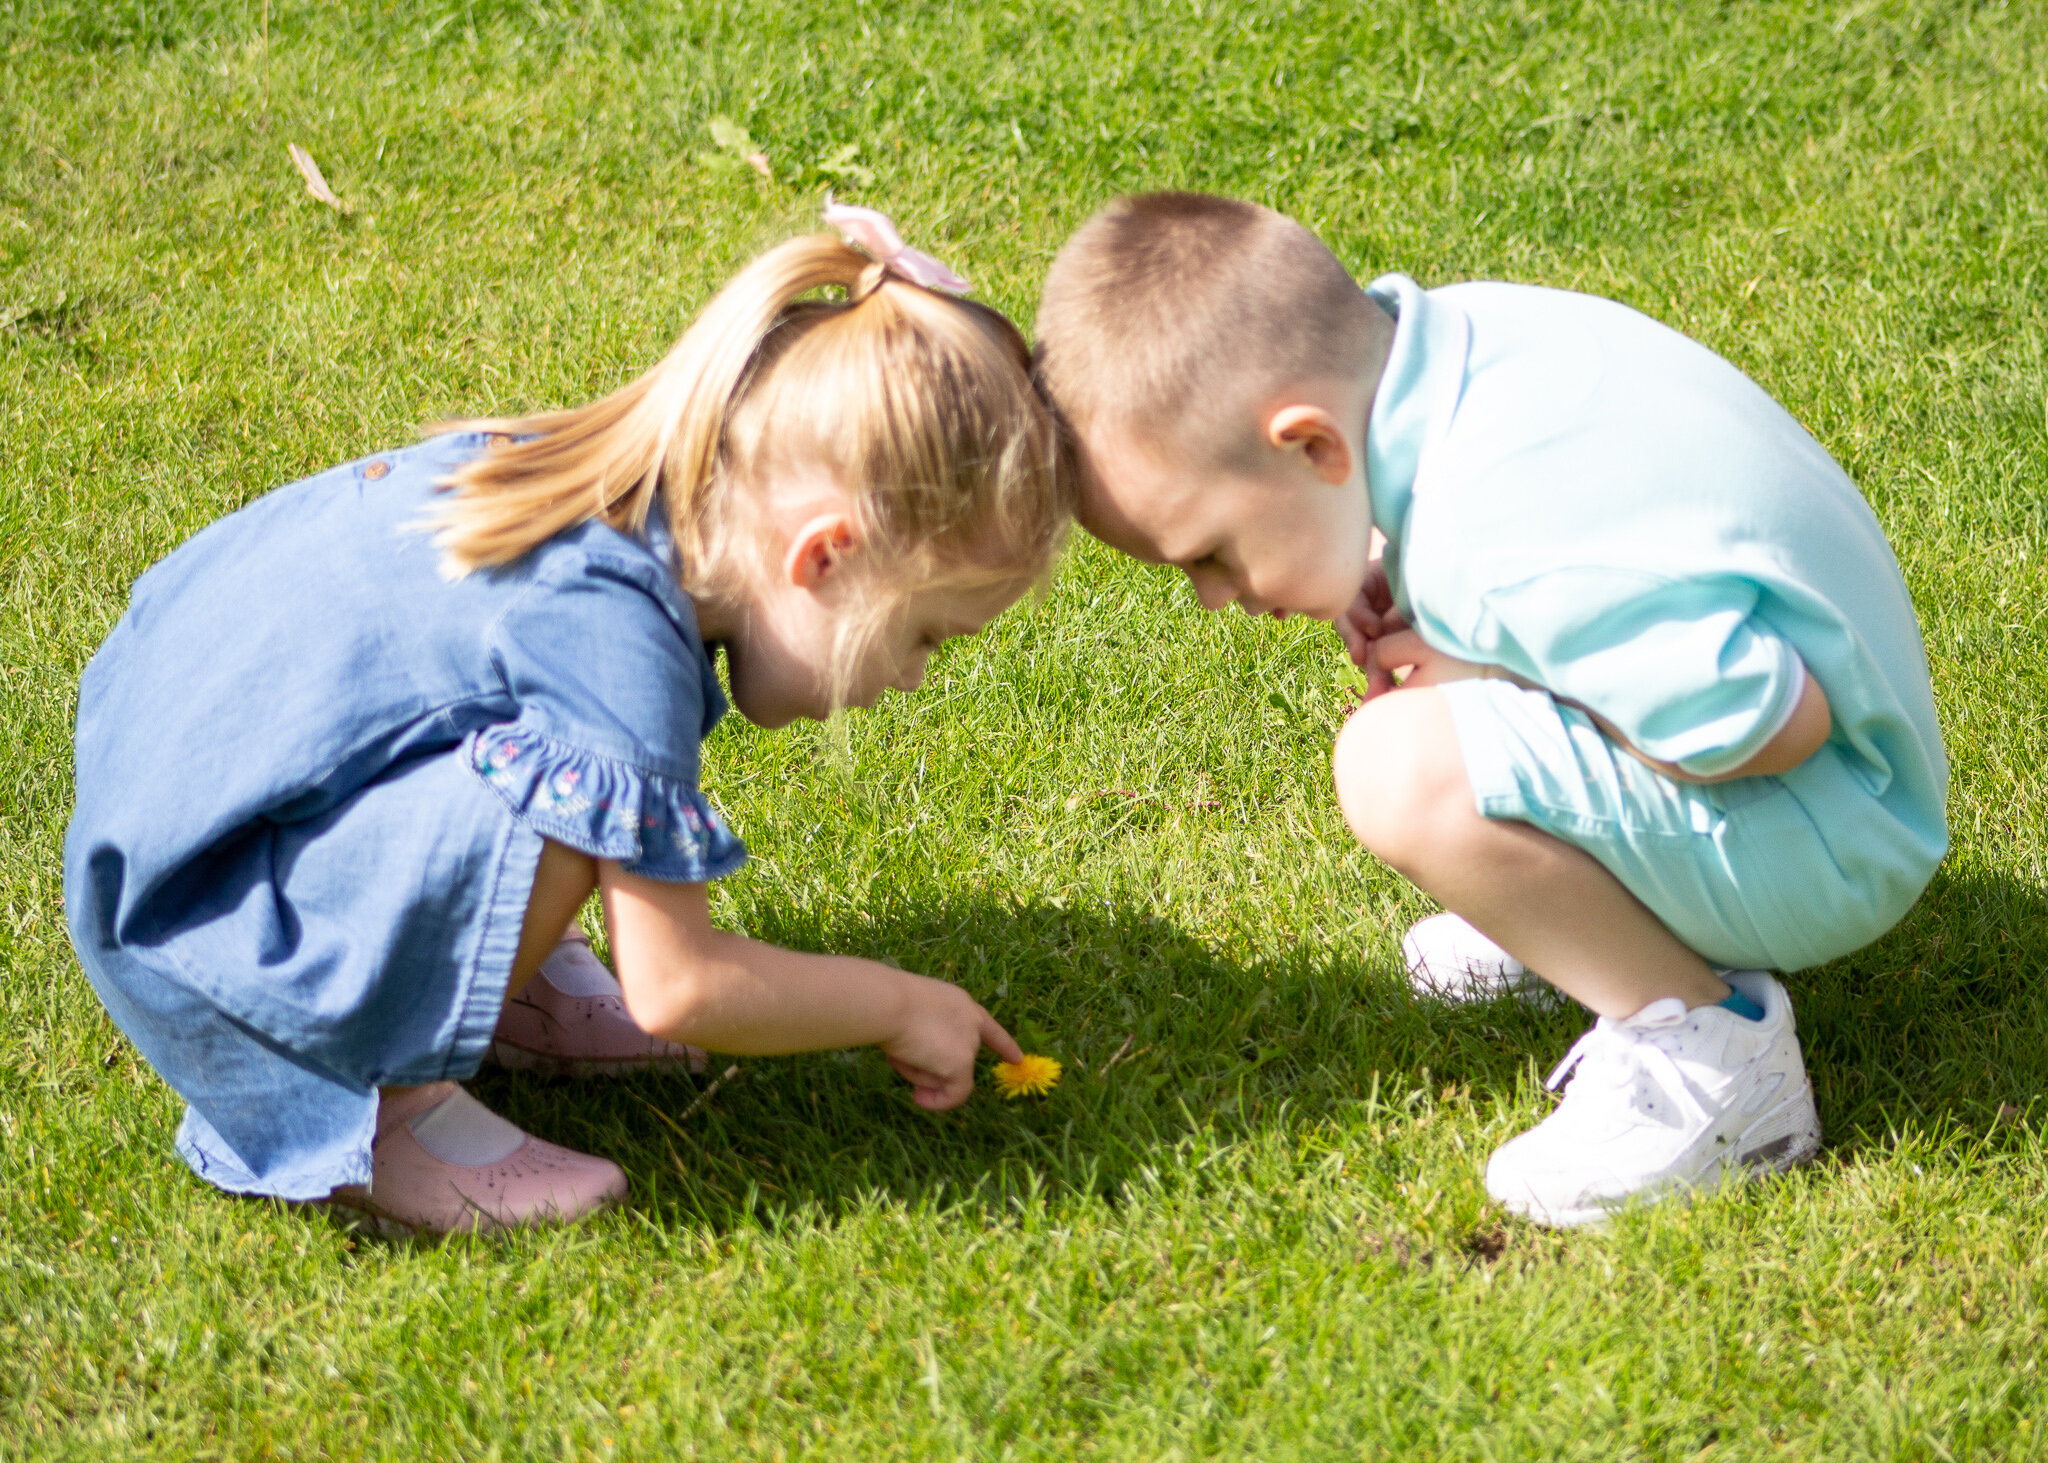 This was too cute. These two lovely cousins had such an amazing loving relationship and this was a little moment they shared when they spotted a daffodil during their family nature session.